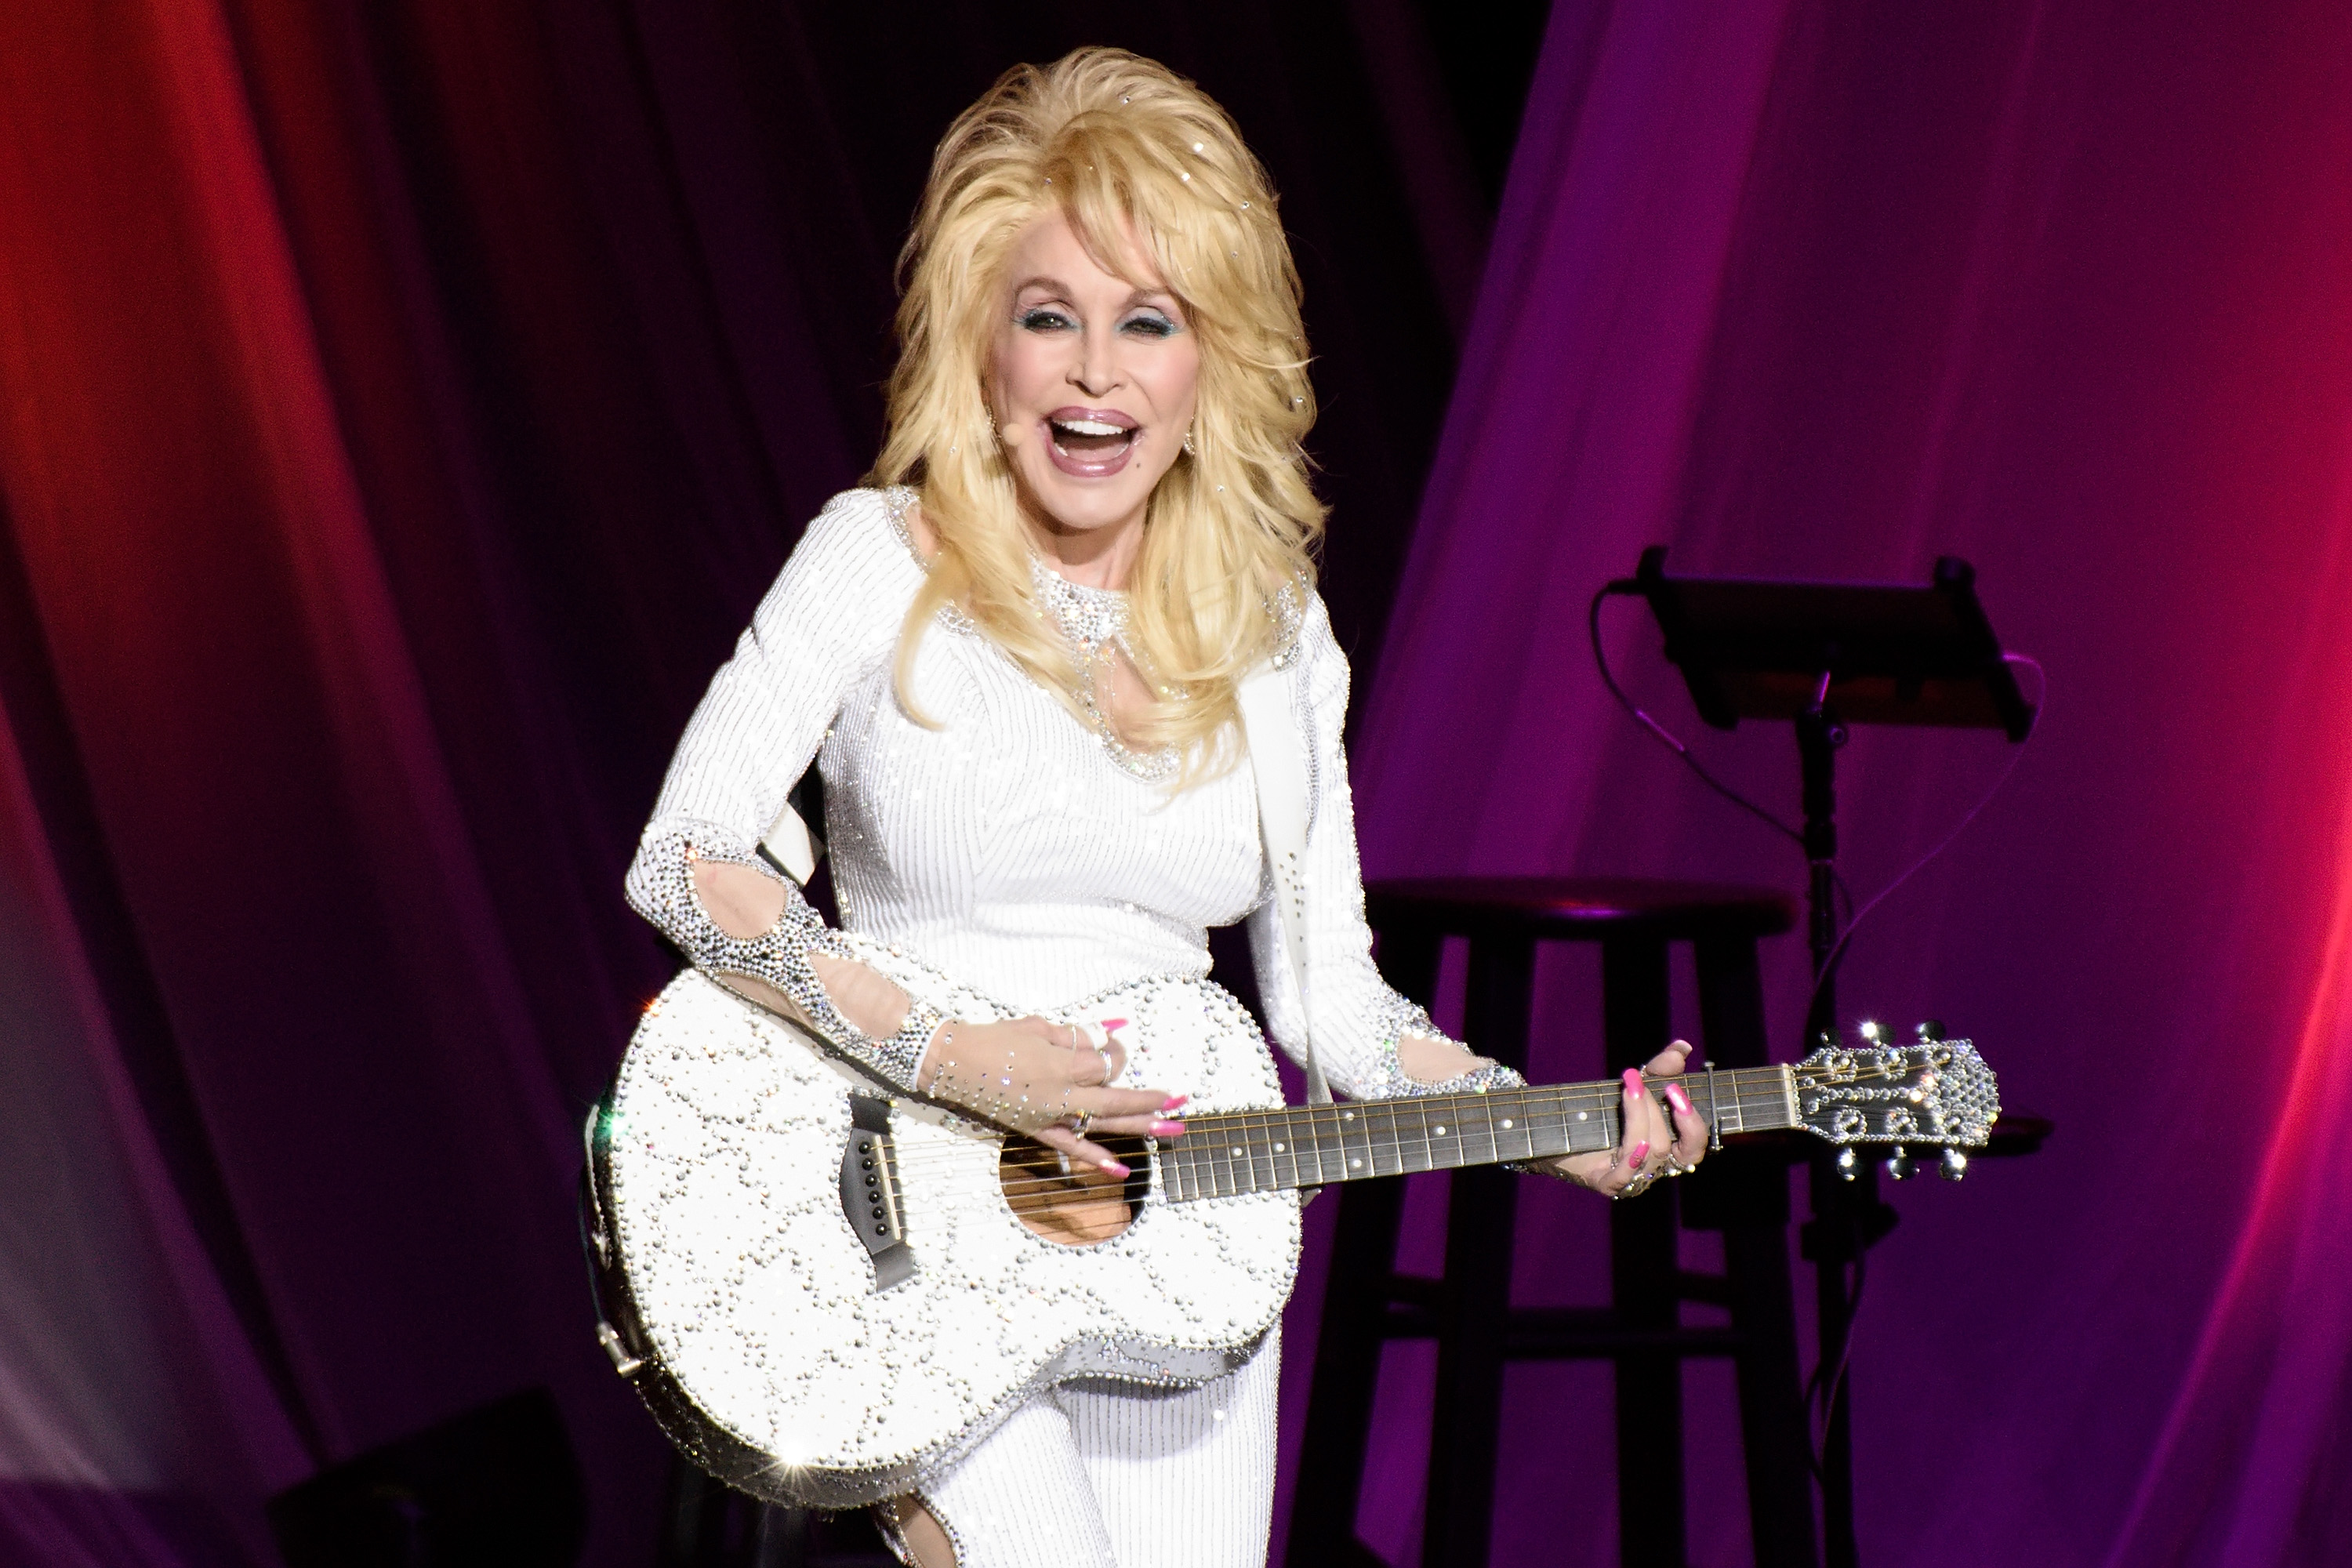 Dolly Parton, smiling and looking happy, wears an all white outfit and carries a white guitar.